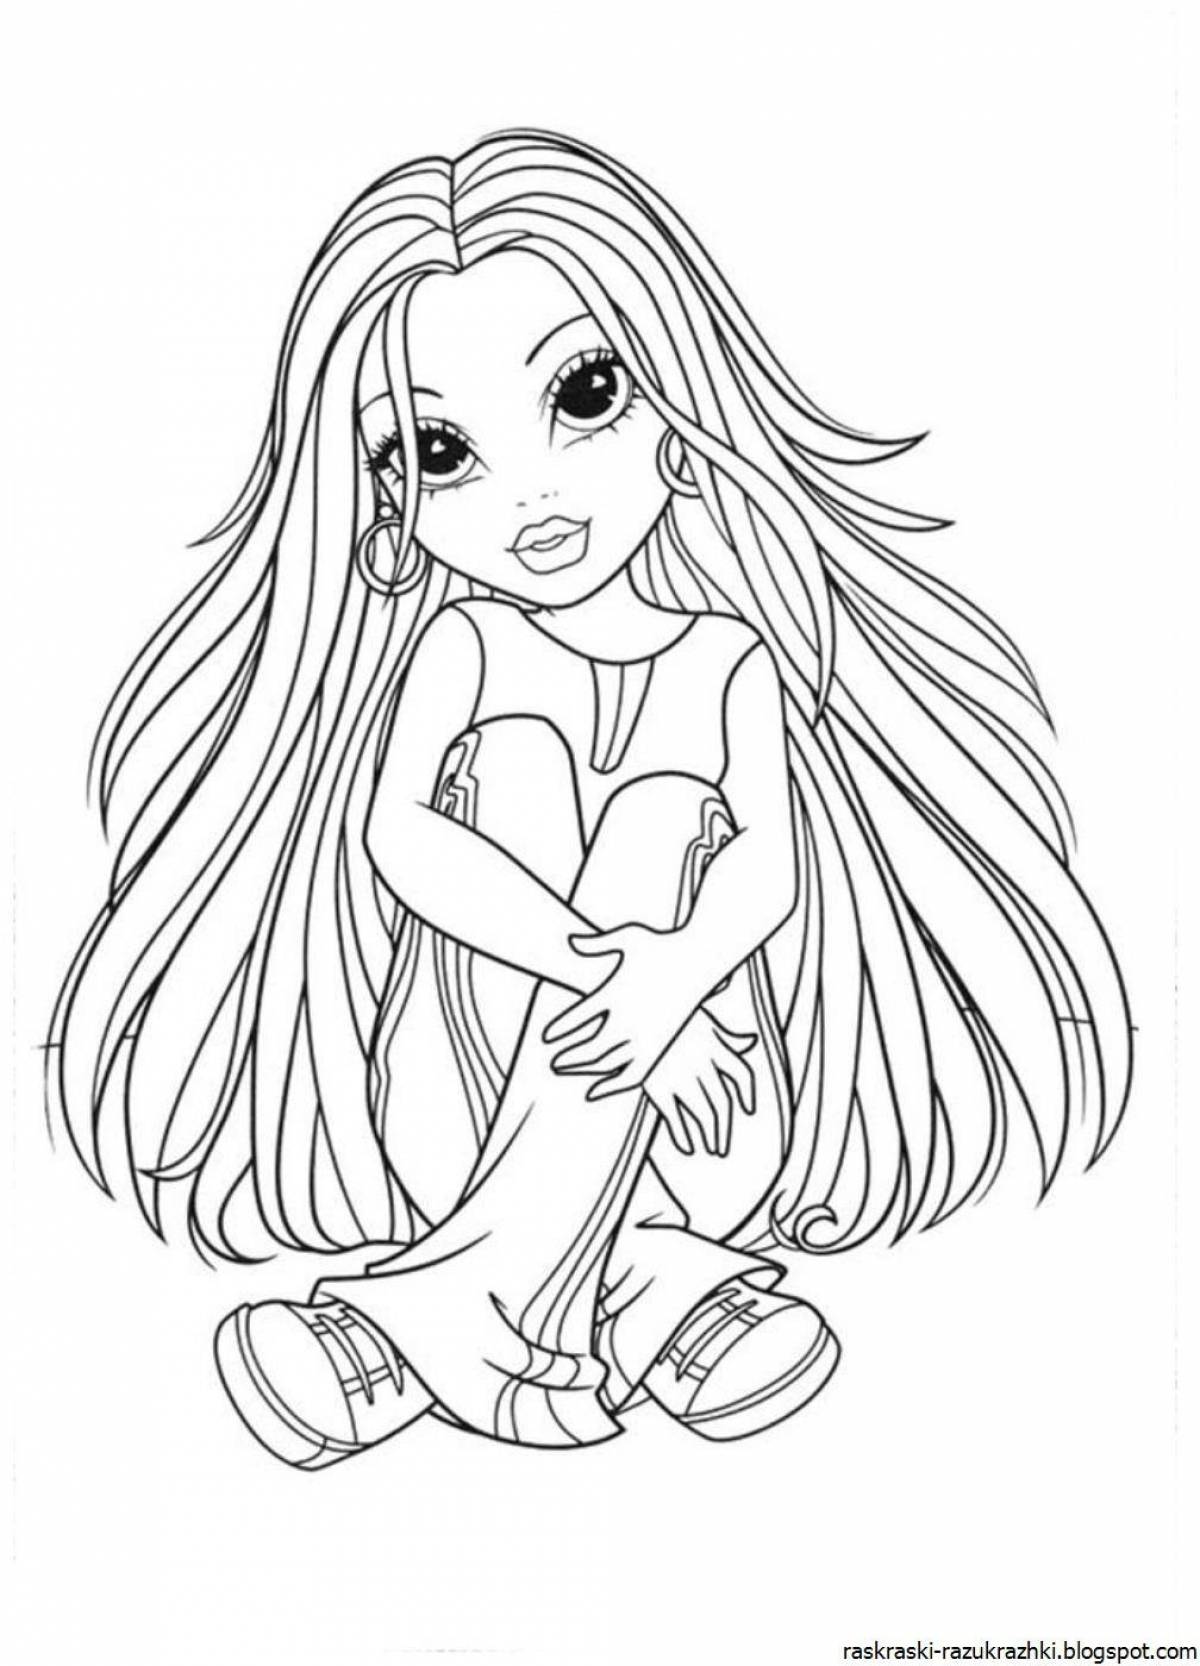 Stylish coloring pages for girls